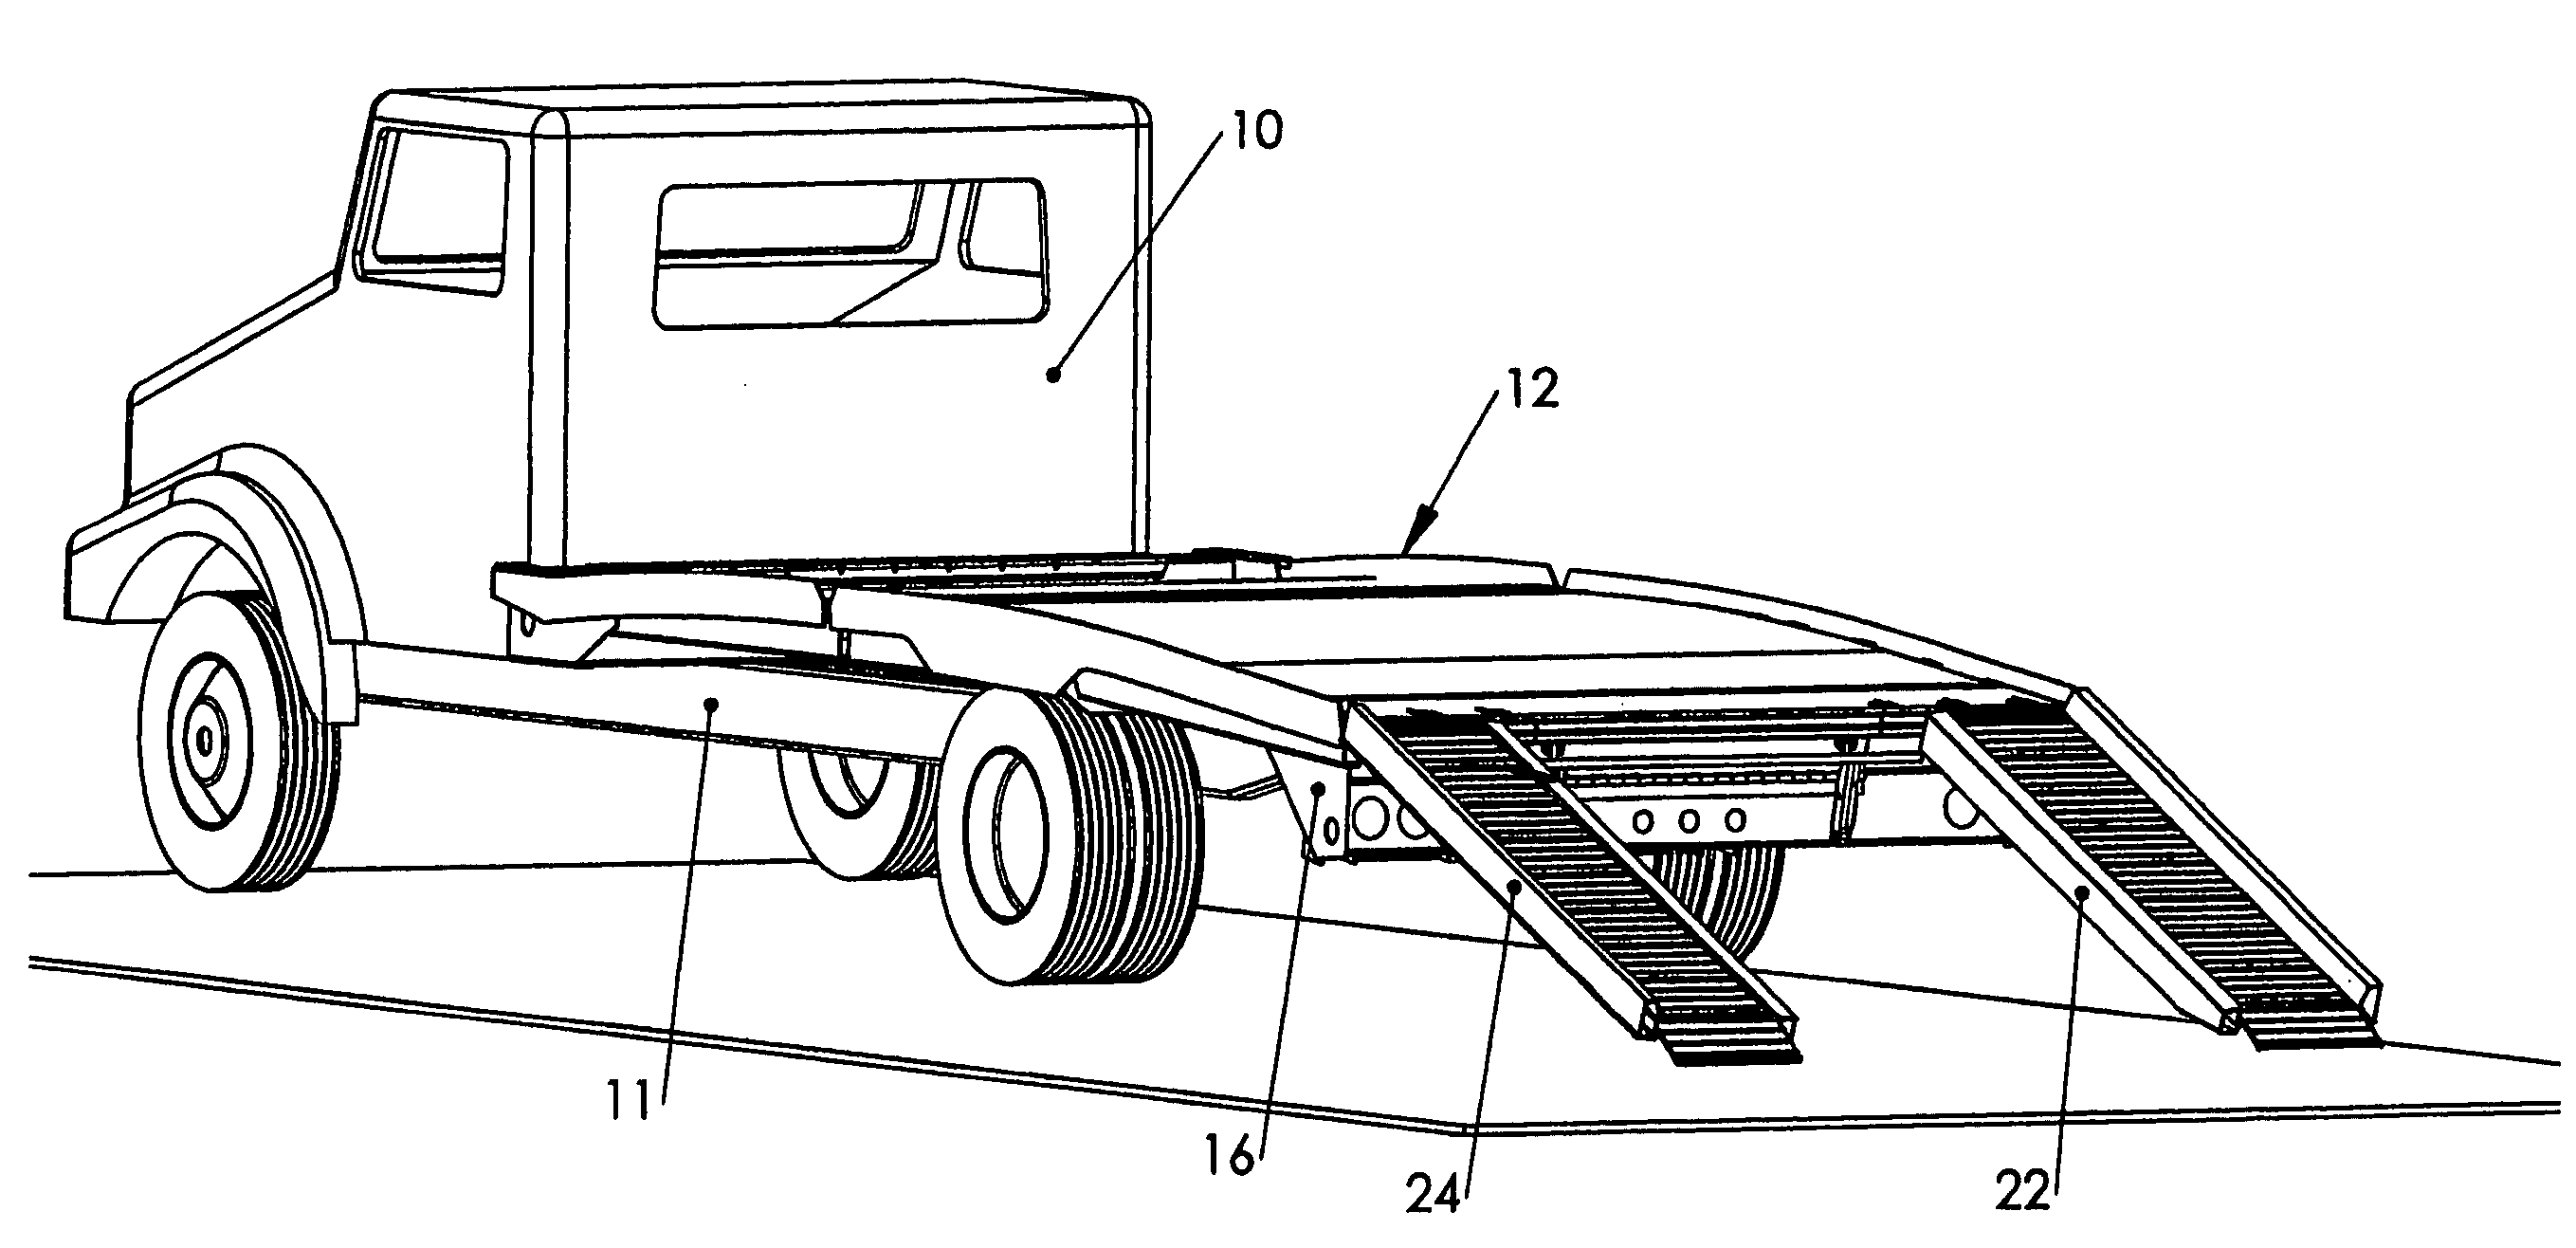 Truck bed design for automotive and equipment delivery